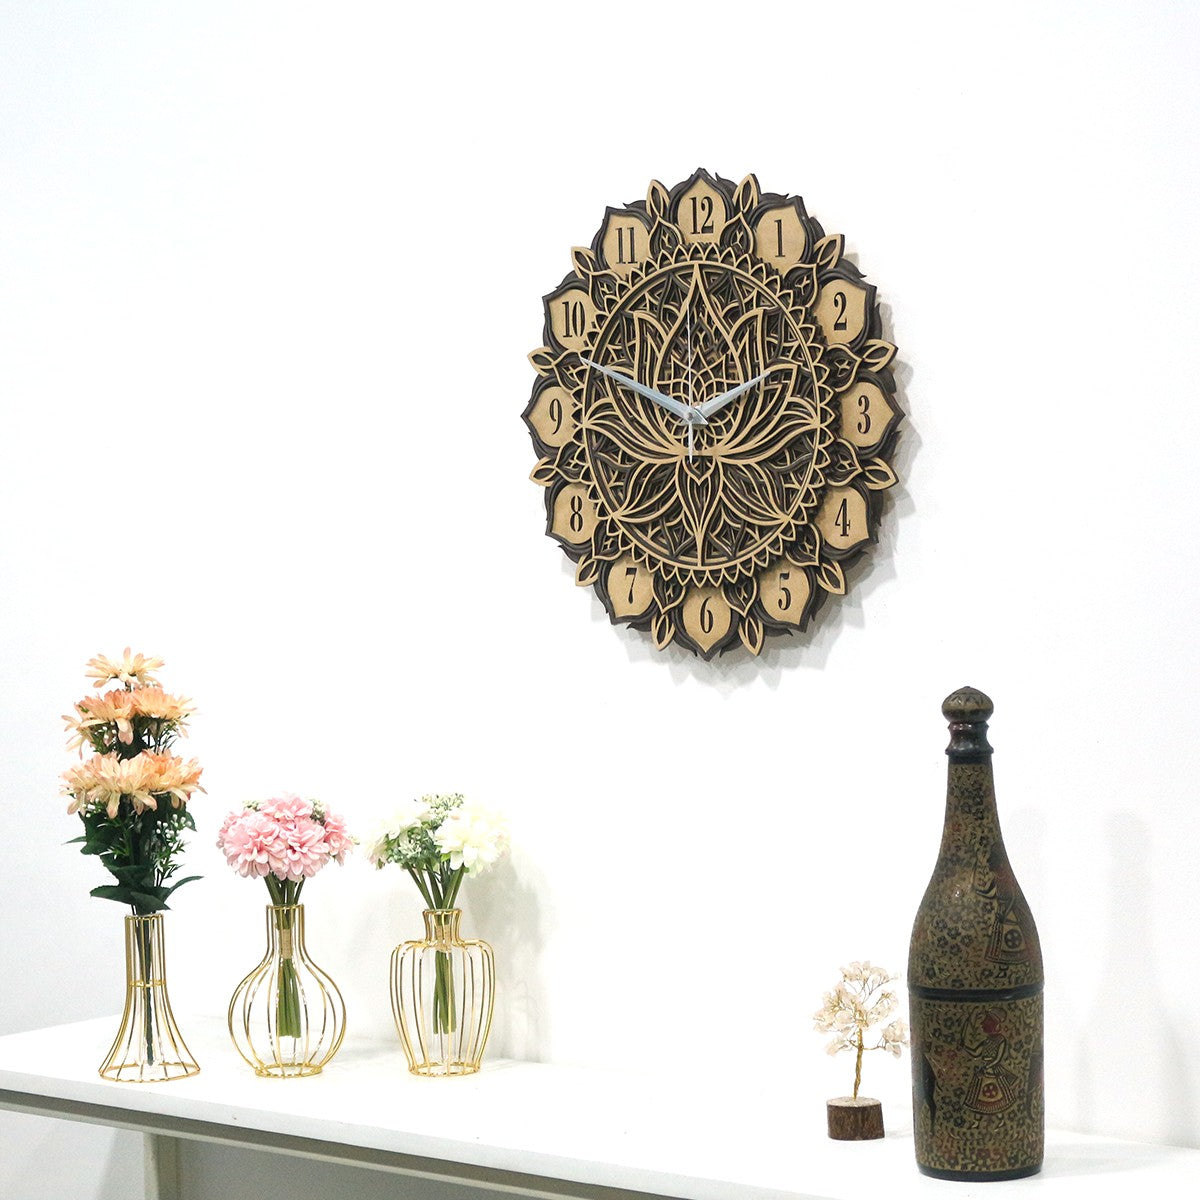 Antique Wall Clock for Office Wall Decor